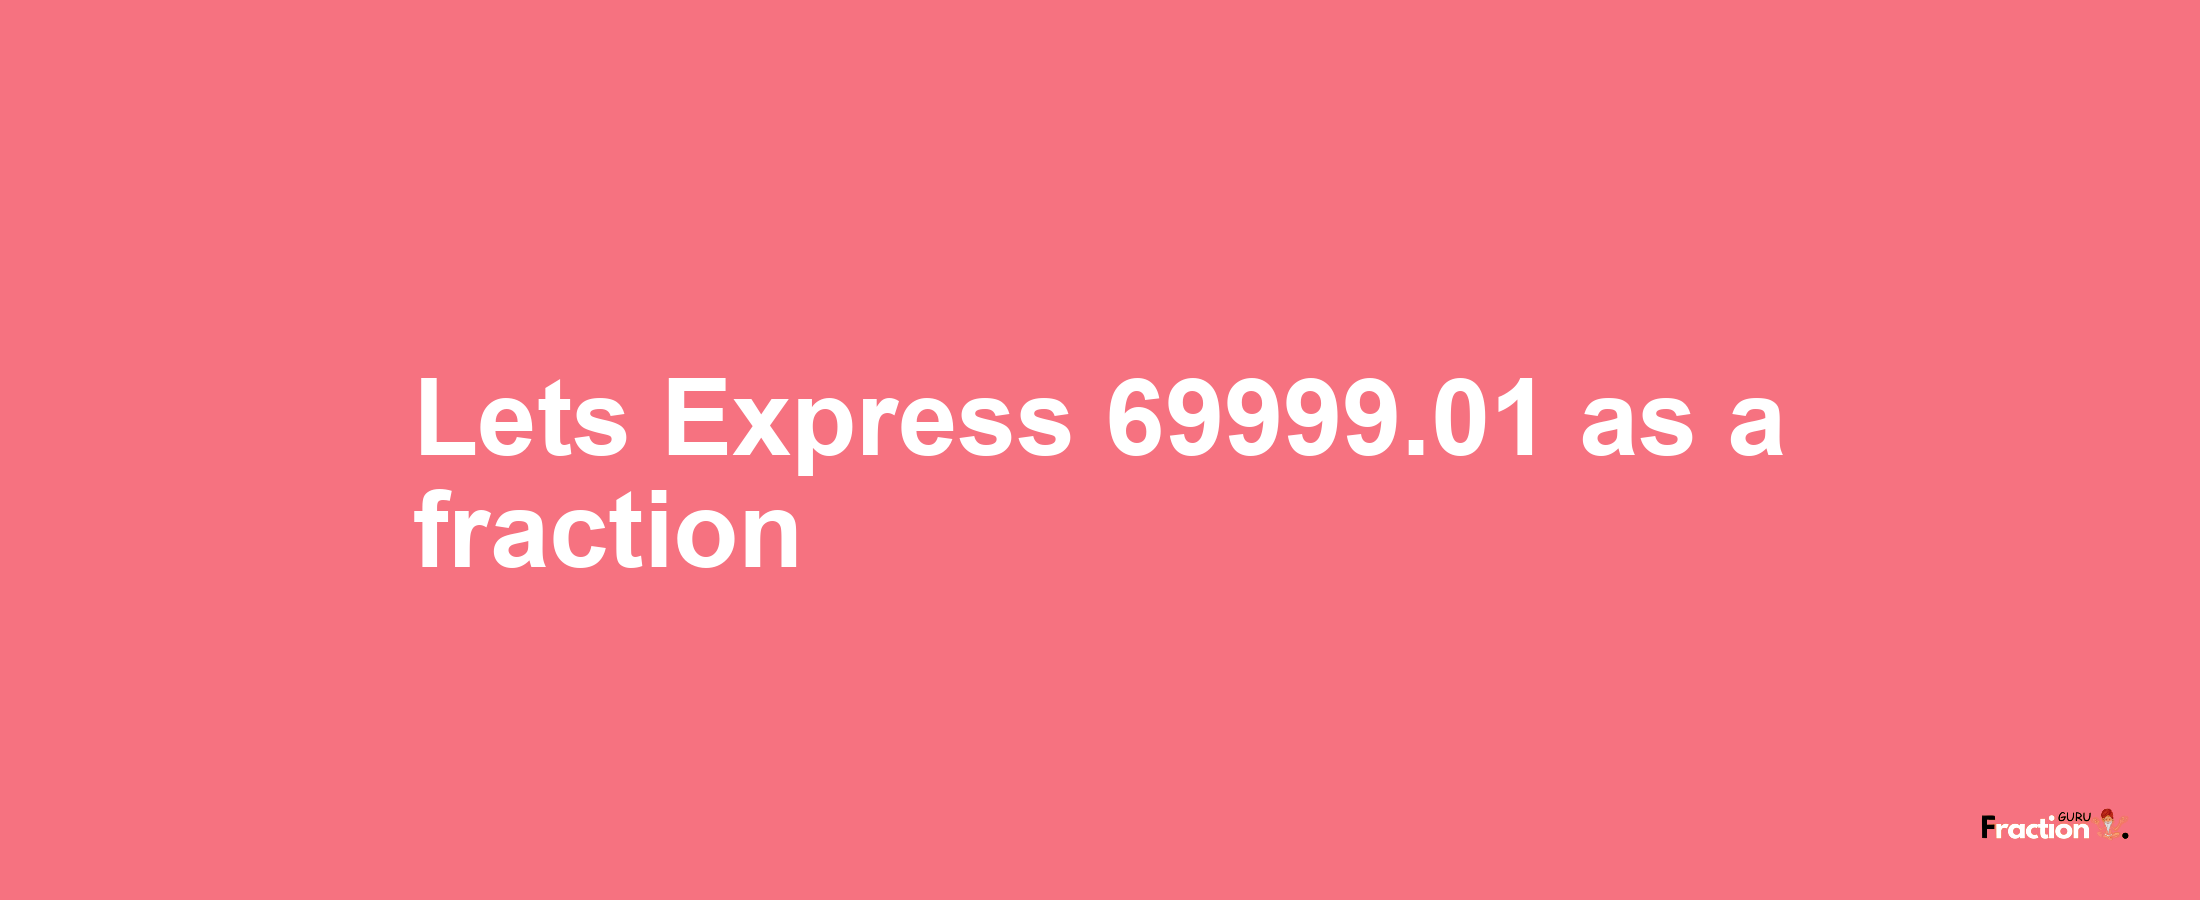 Lets Express 69999.01 as afraction